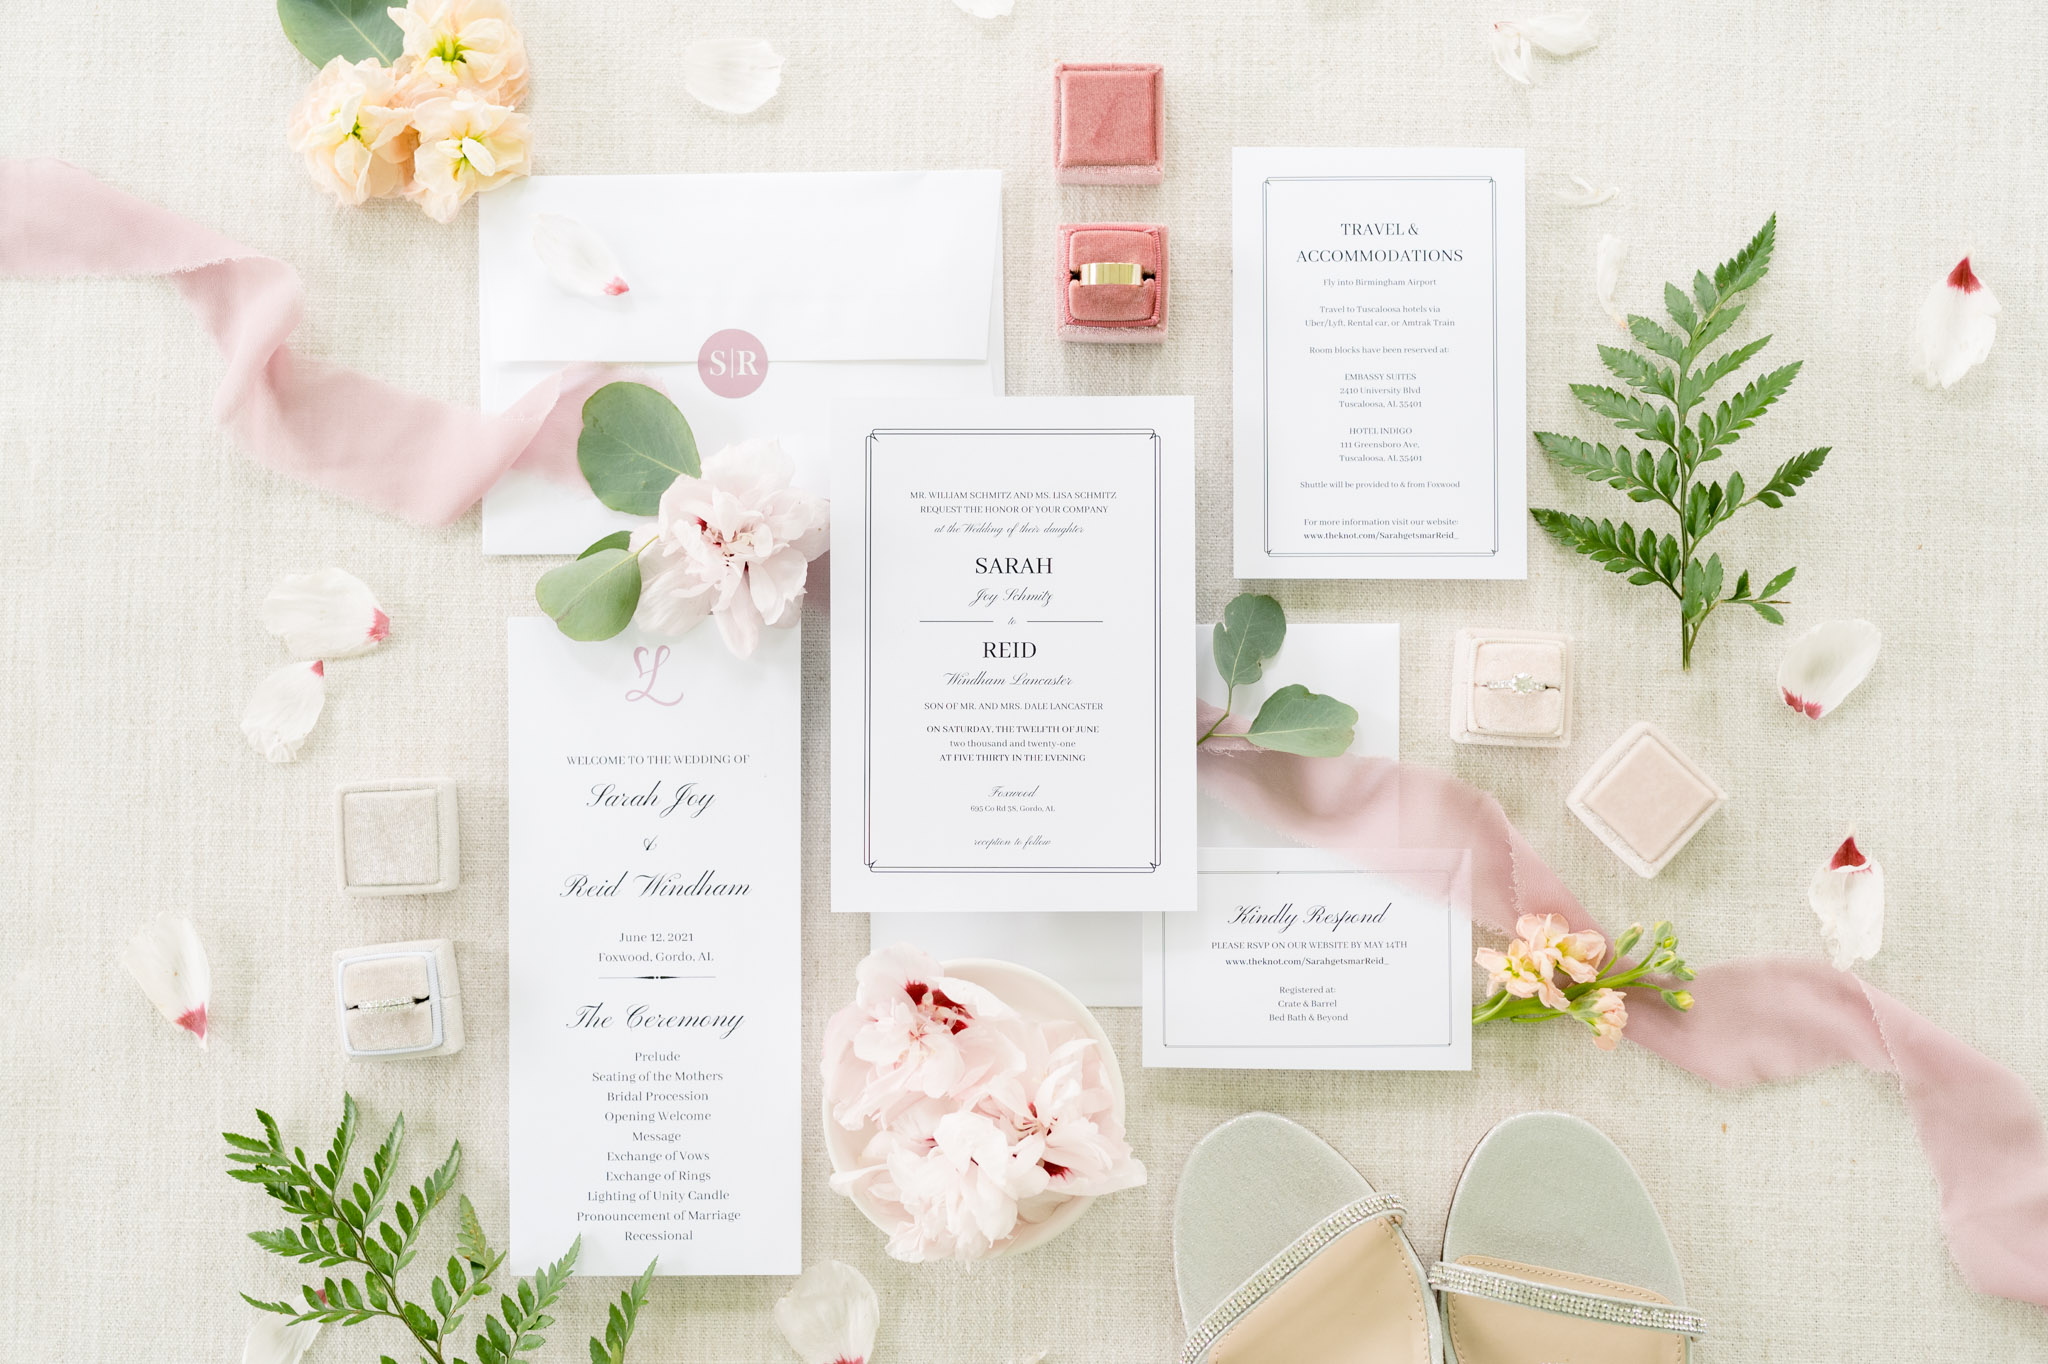 White and black invitation suite with pink accents.